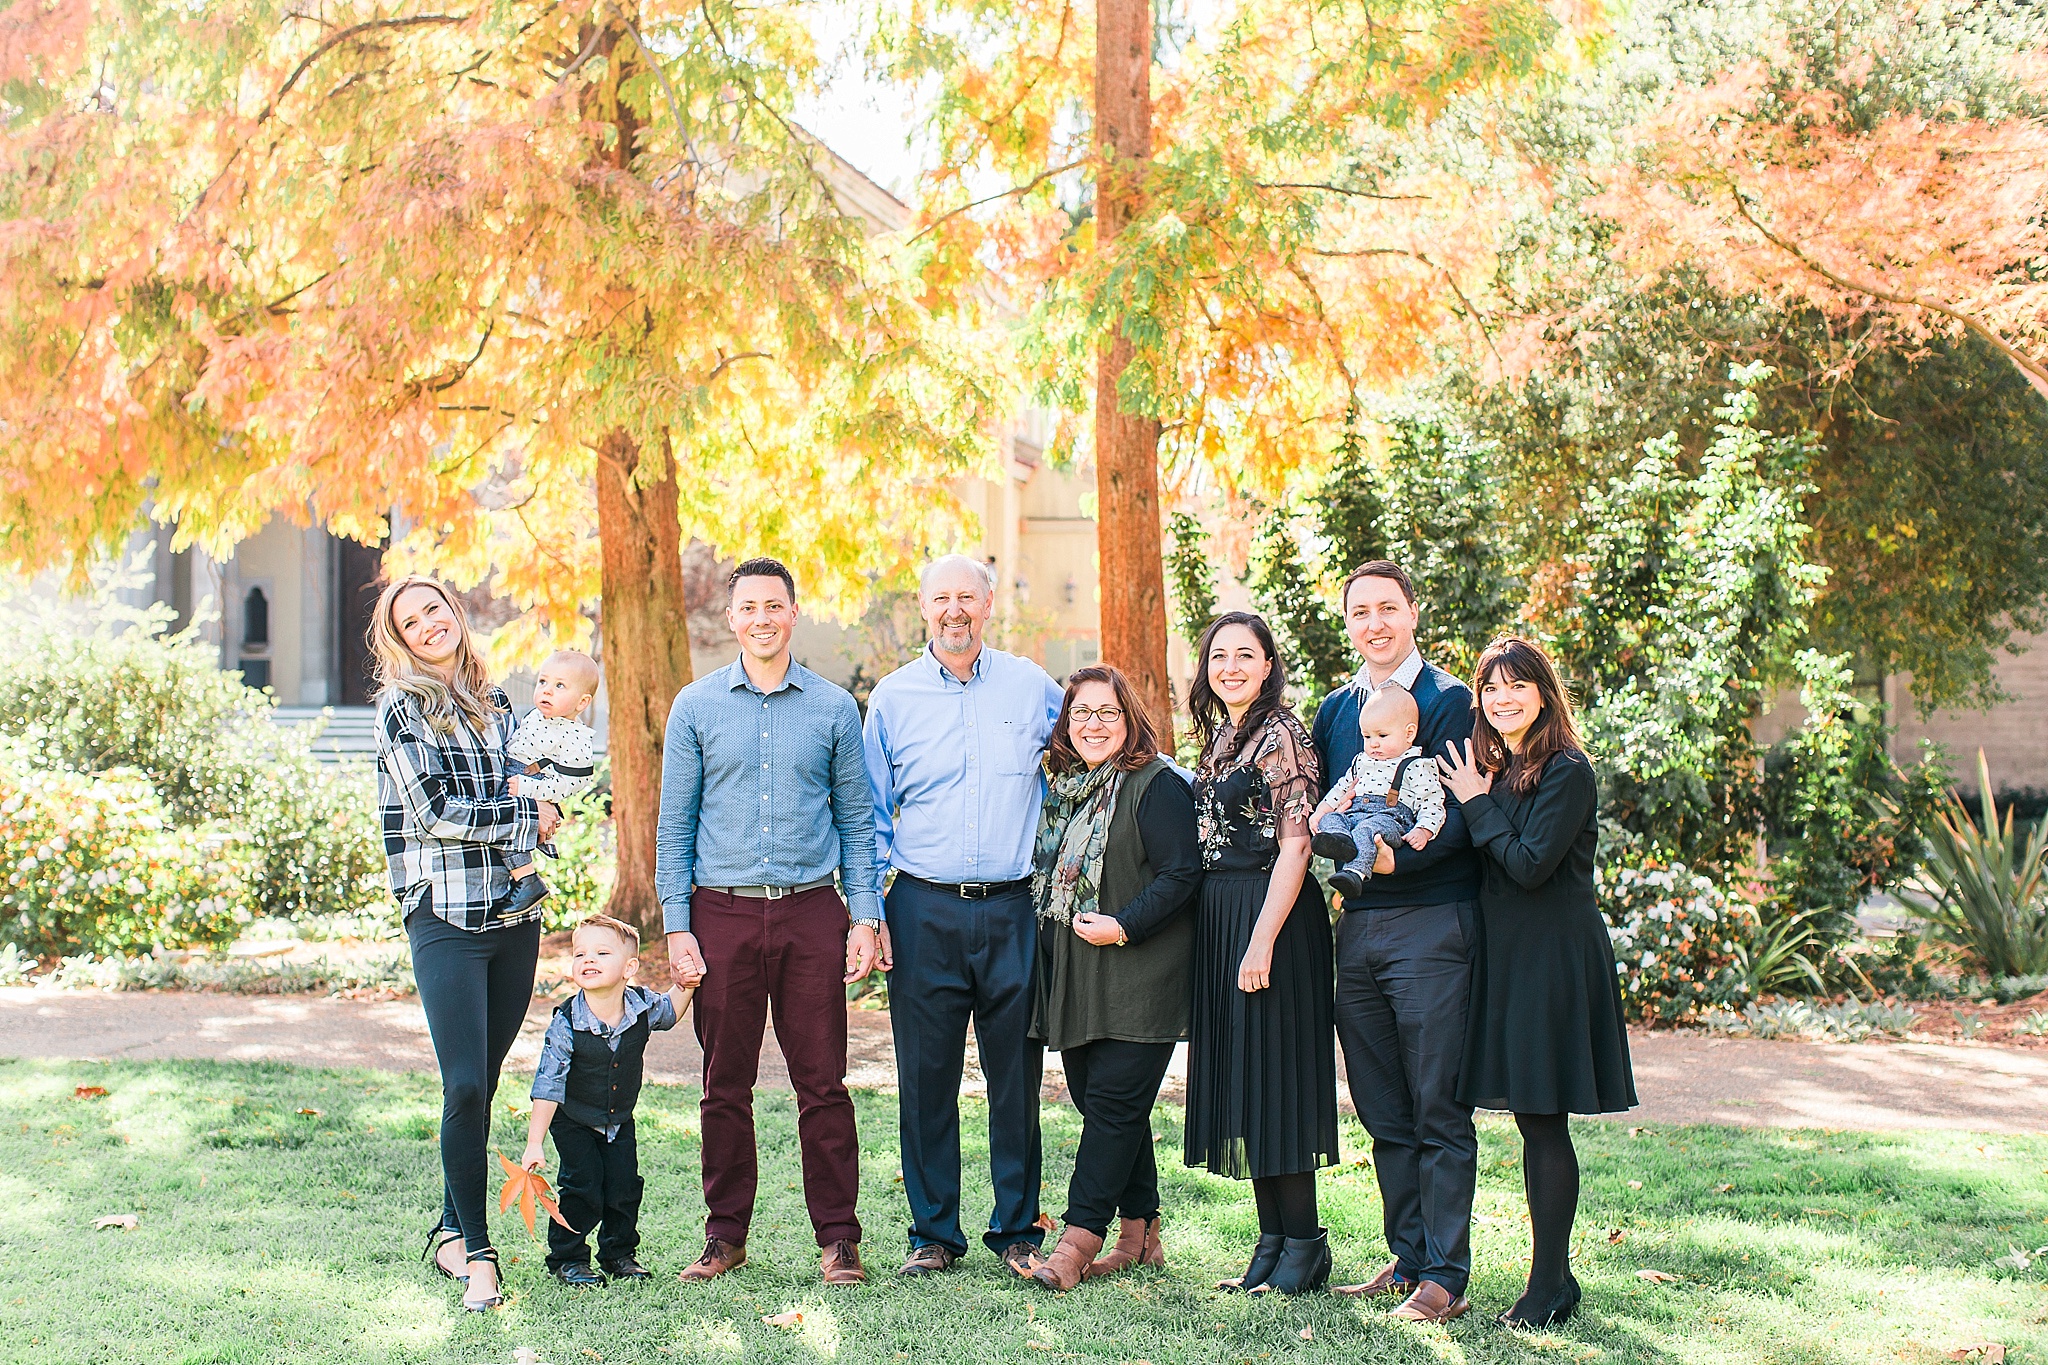 Claremont-Colleges-Family-Photos-22_WEB.jpg